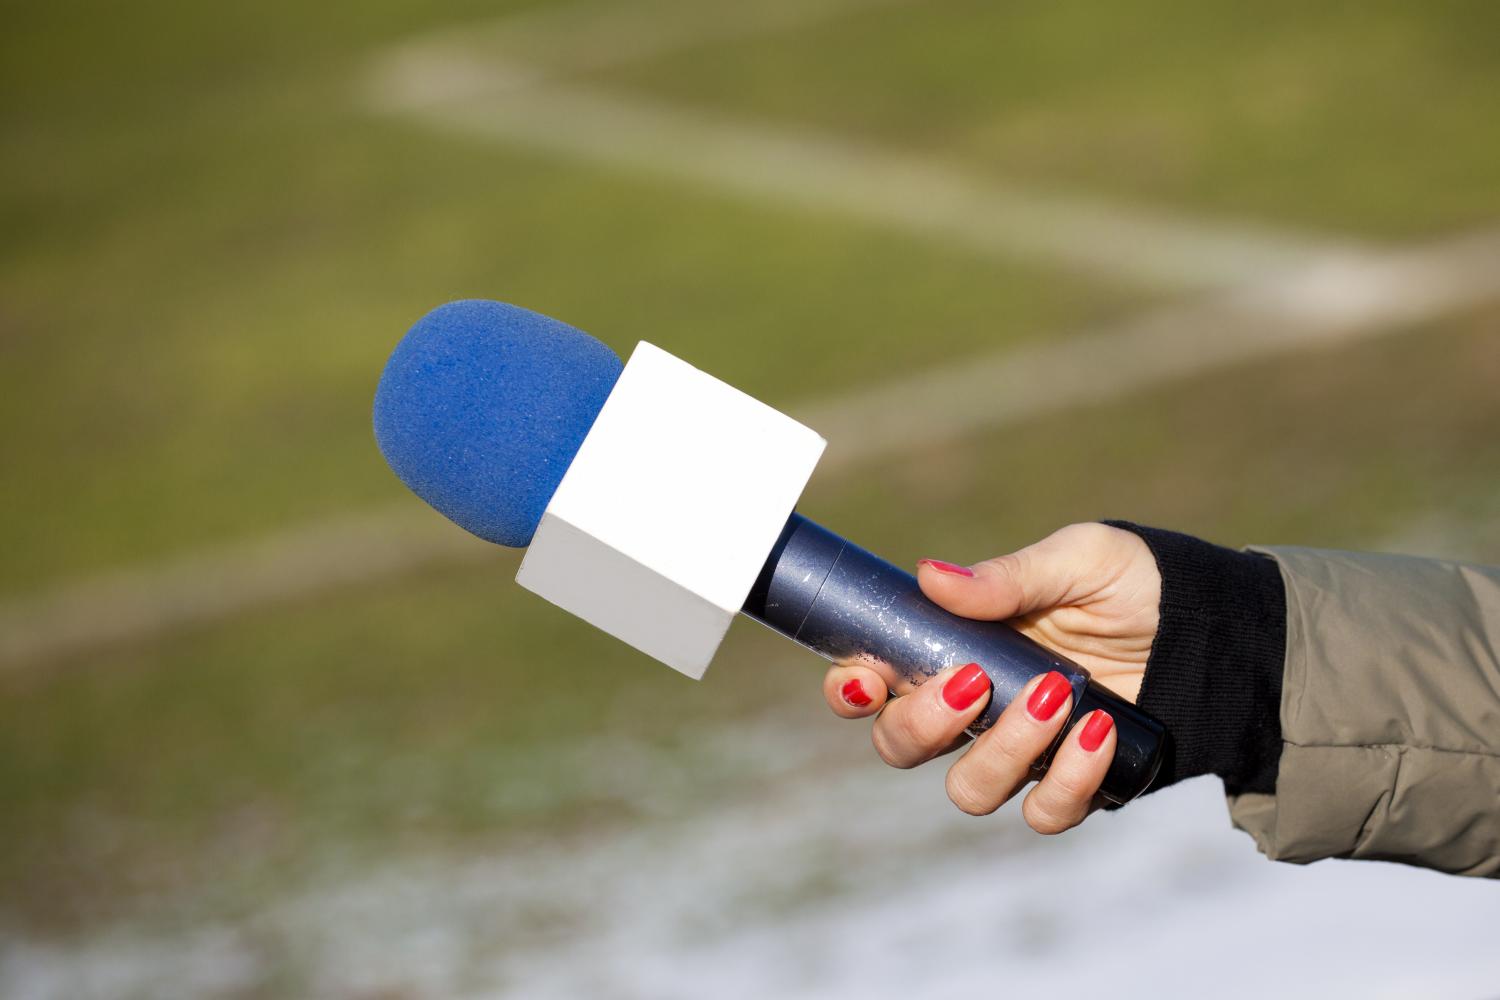 Integrity over Physique: Women In Sports Journalism